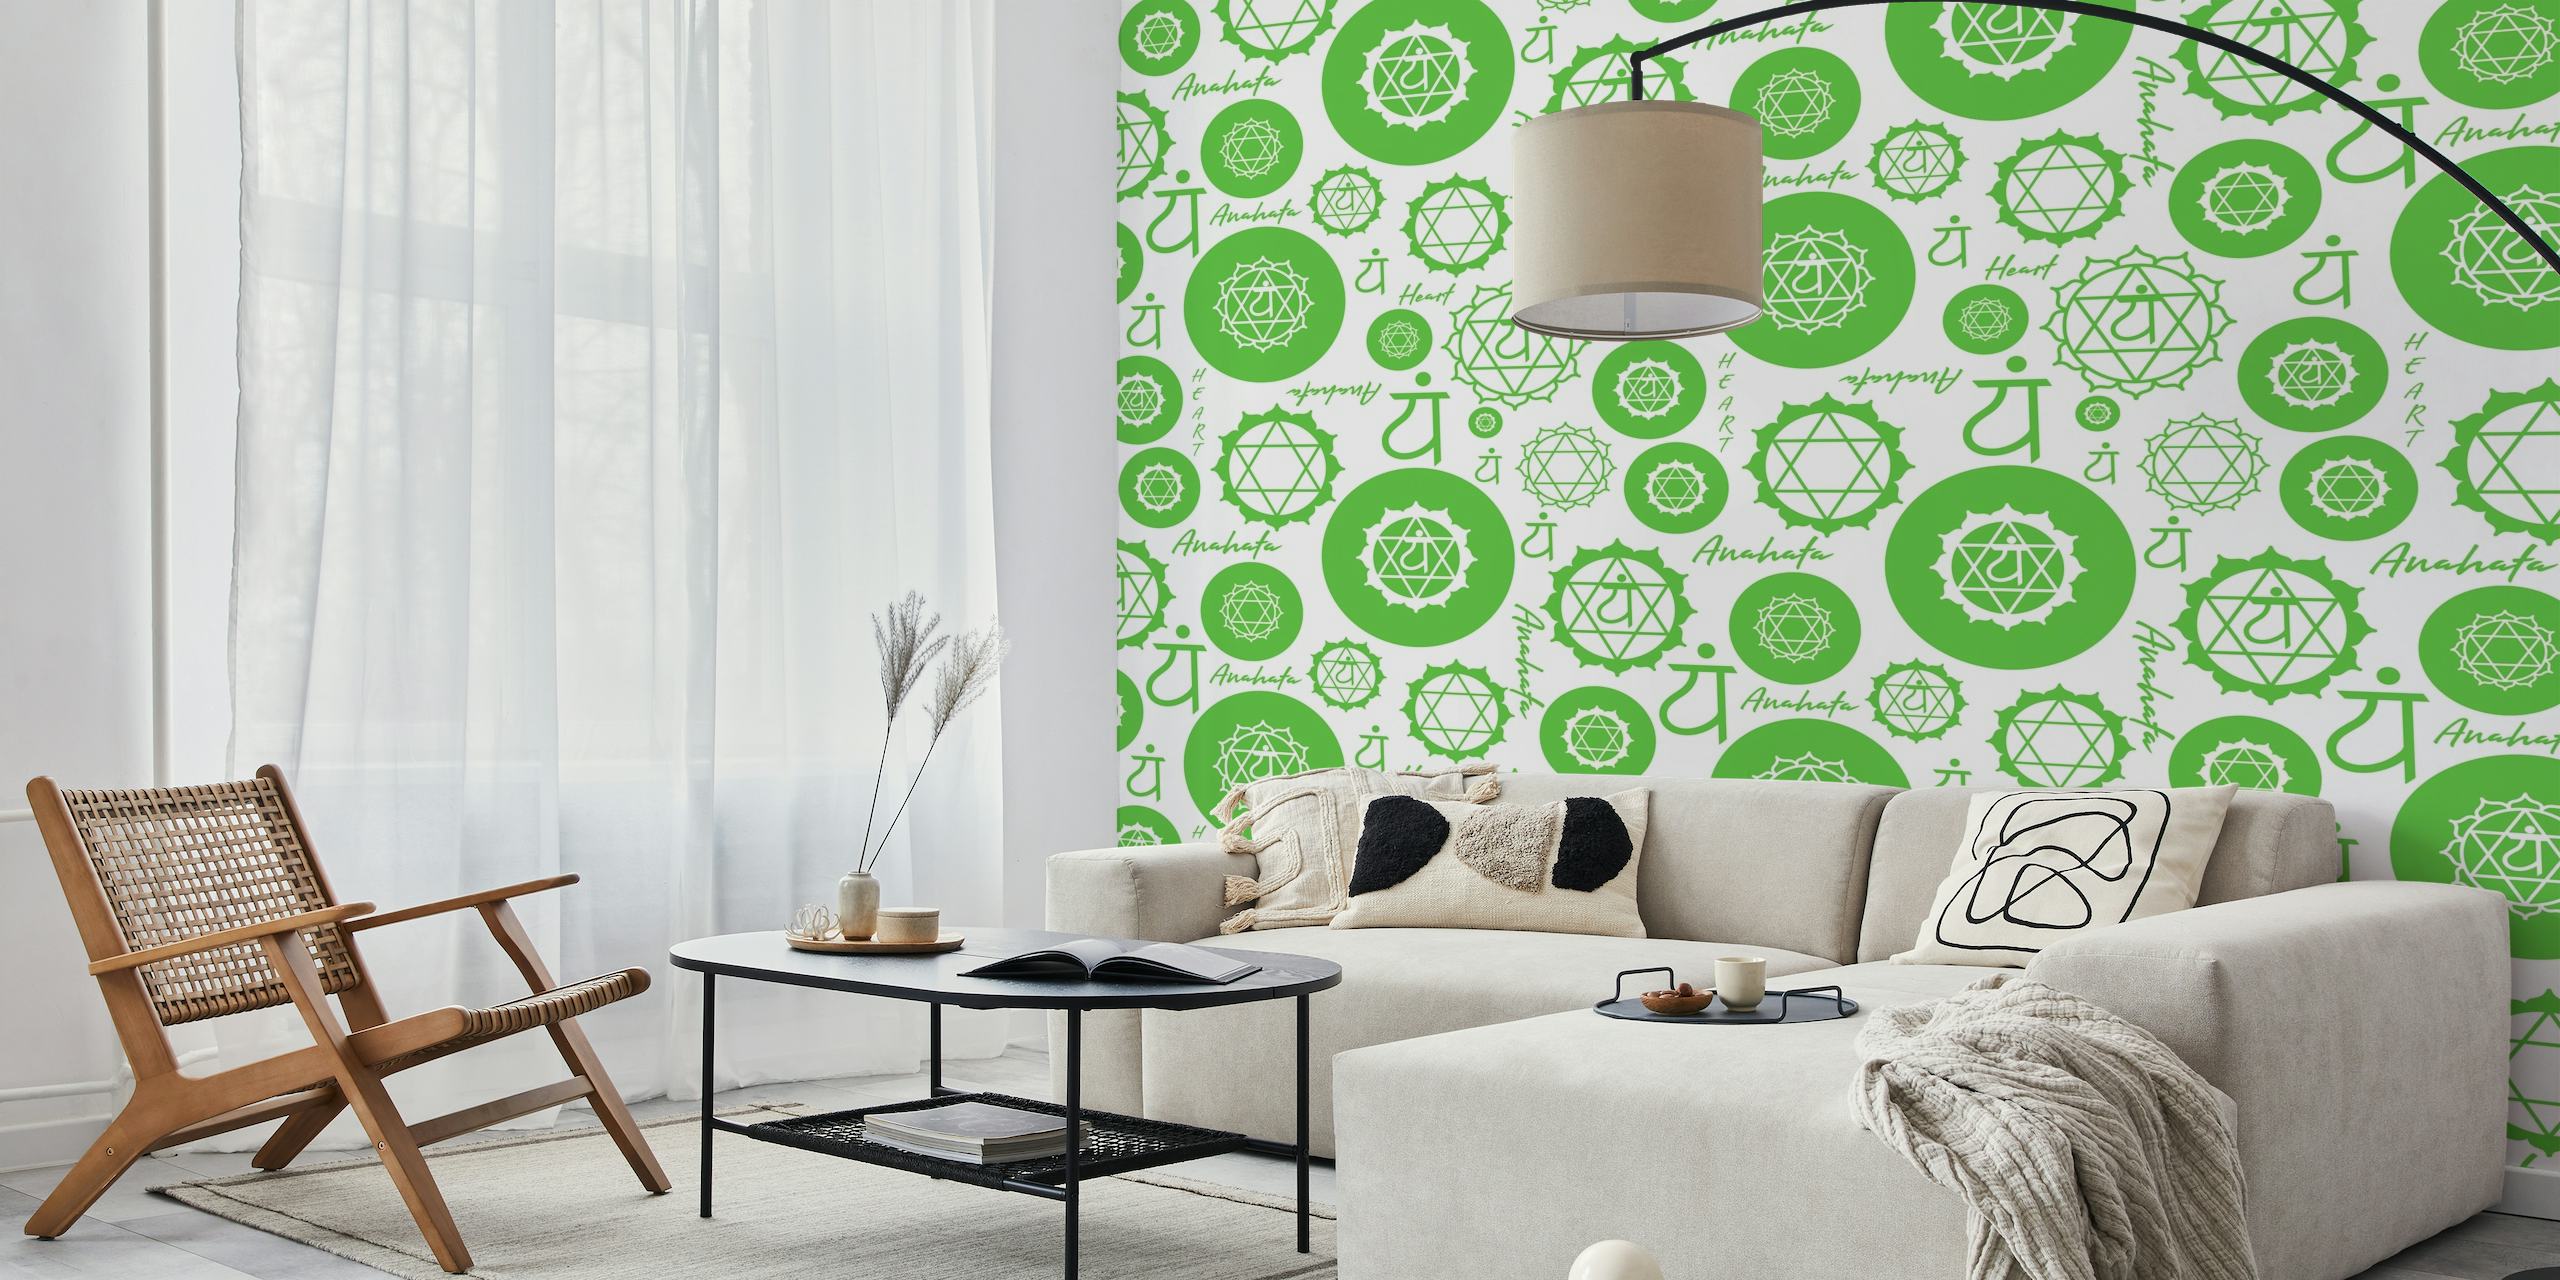 Heart Anahata Chakra pattern wall mural with green symbols and Sanskrit script on a white background